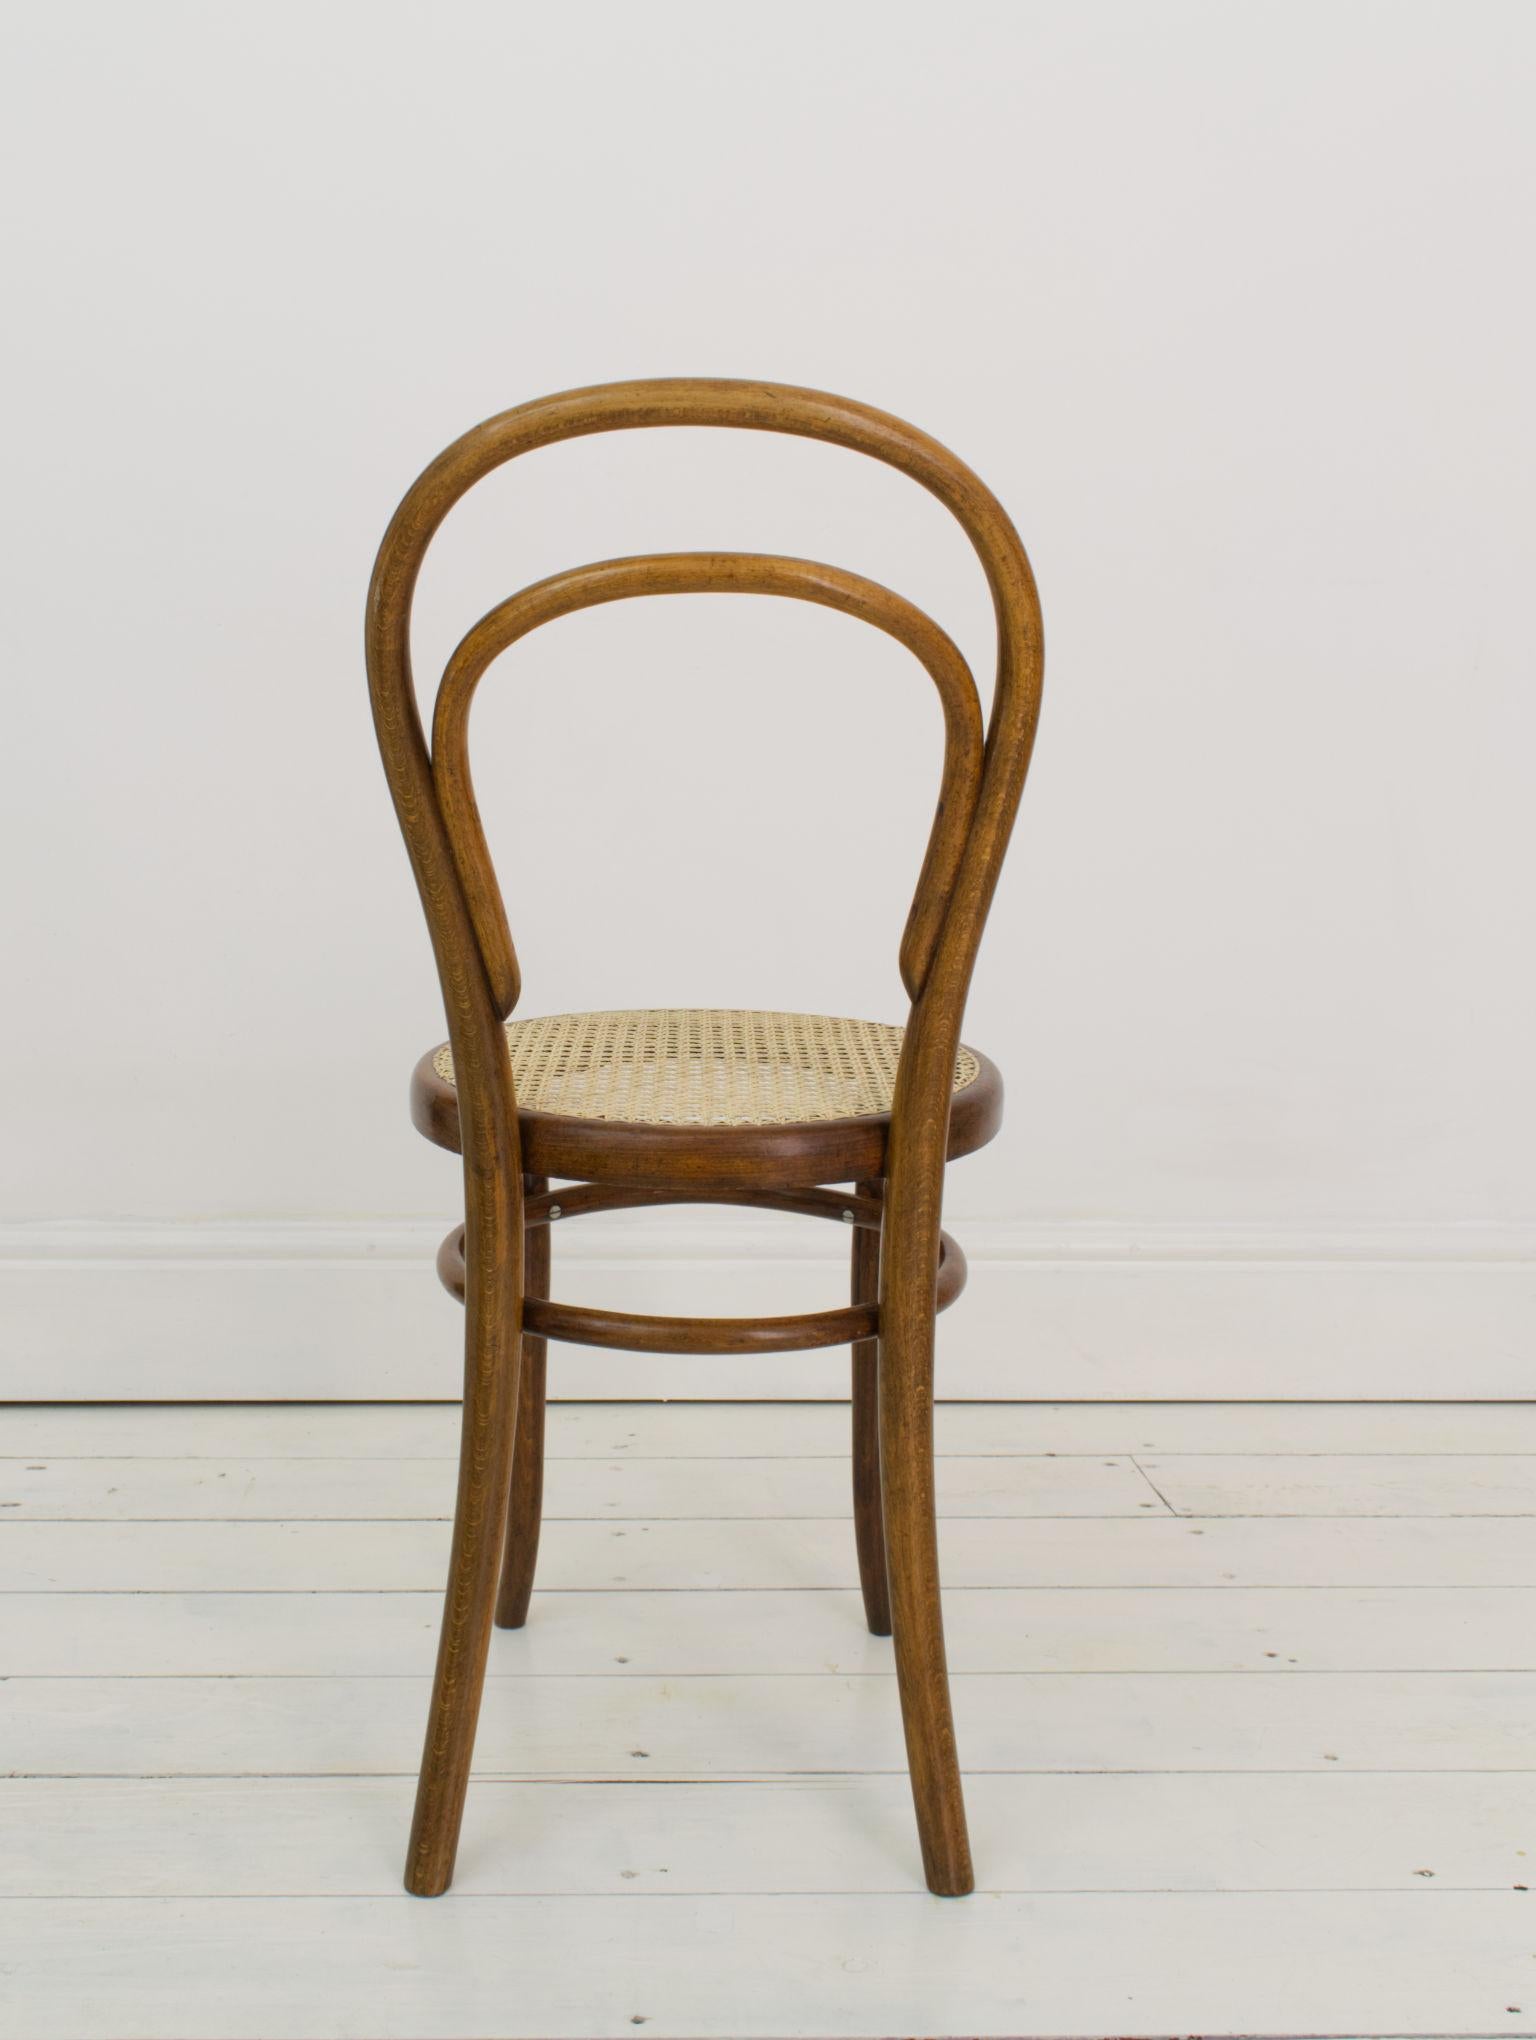 An early example of Thonet’s most famous chair, with original label dating it between 1890-1910, this chair is also mysteriously branded P.V.C. along the back of the seat, though we have not been able to decipher the originals of this bit of